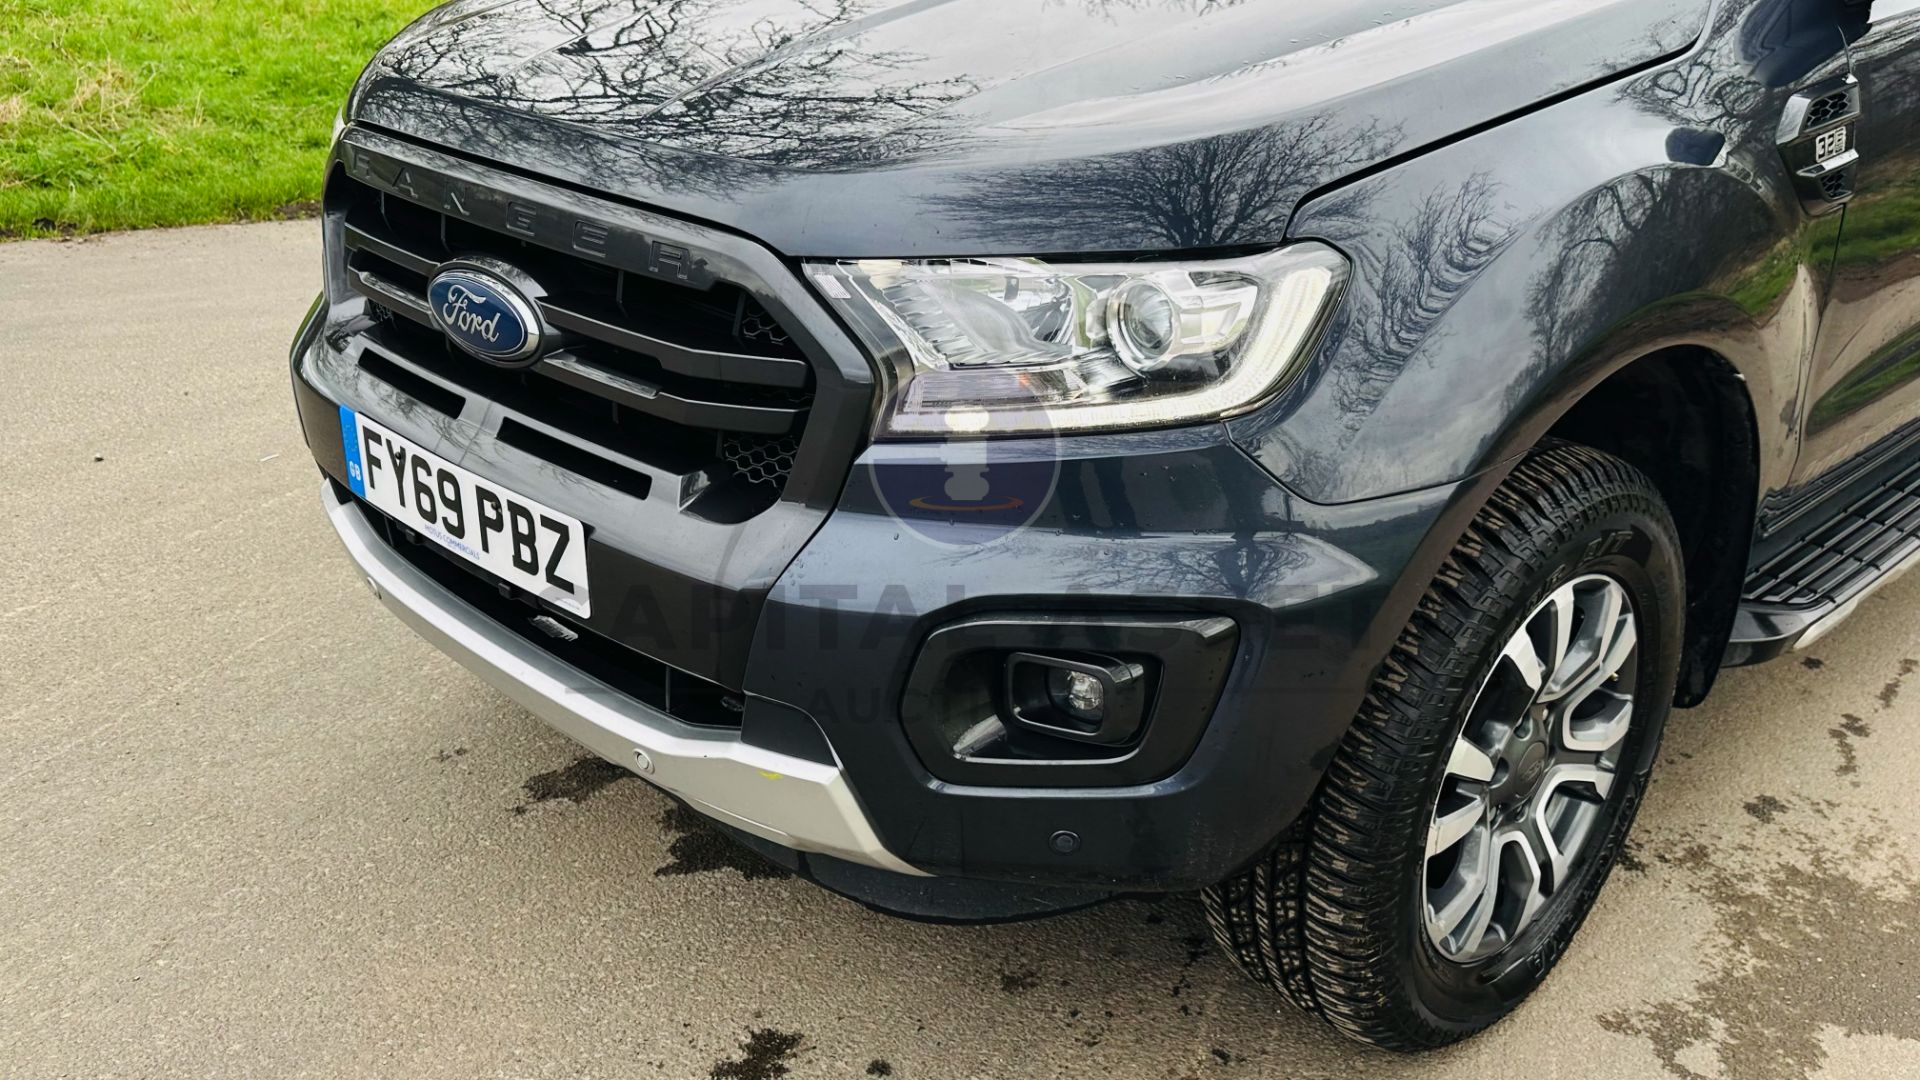 FORD RANGER *WILDTRAK EDITION* DOUBLE CAB PICK-UP (2020 - EURO 6) 3.2 TDCI - AUTOMATIC *HUGE SPEC* - Image 19 of 49